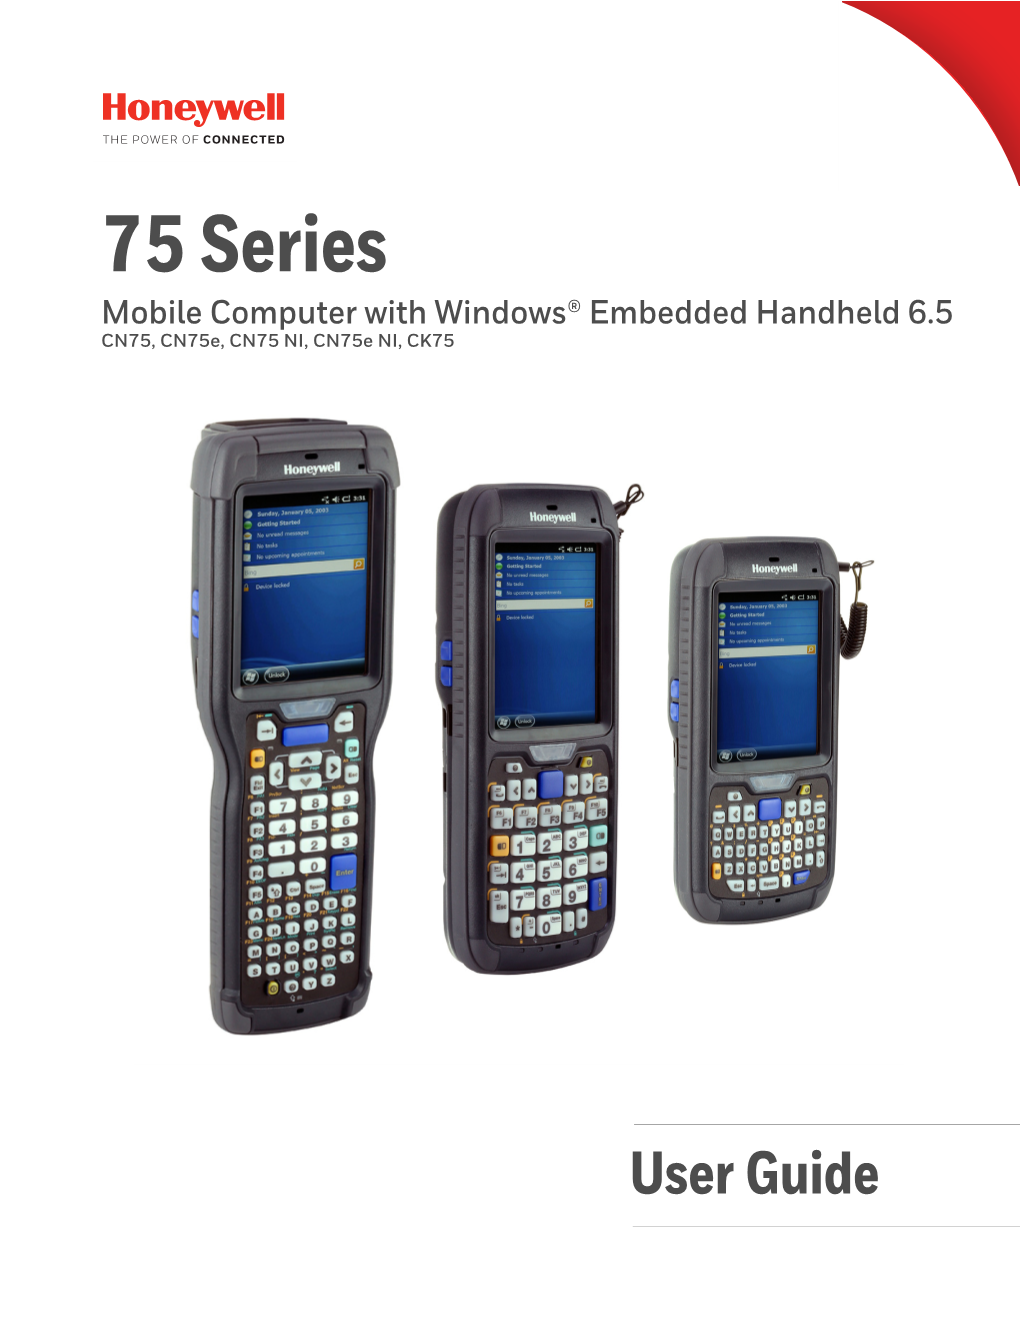 75 Series Mobile Computer with Windows® Embedded Handheld 6.5 User Guide